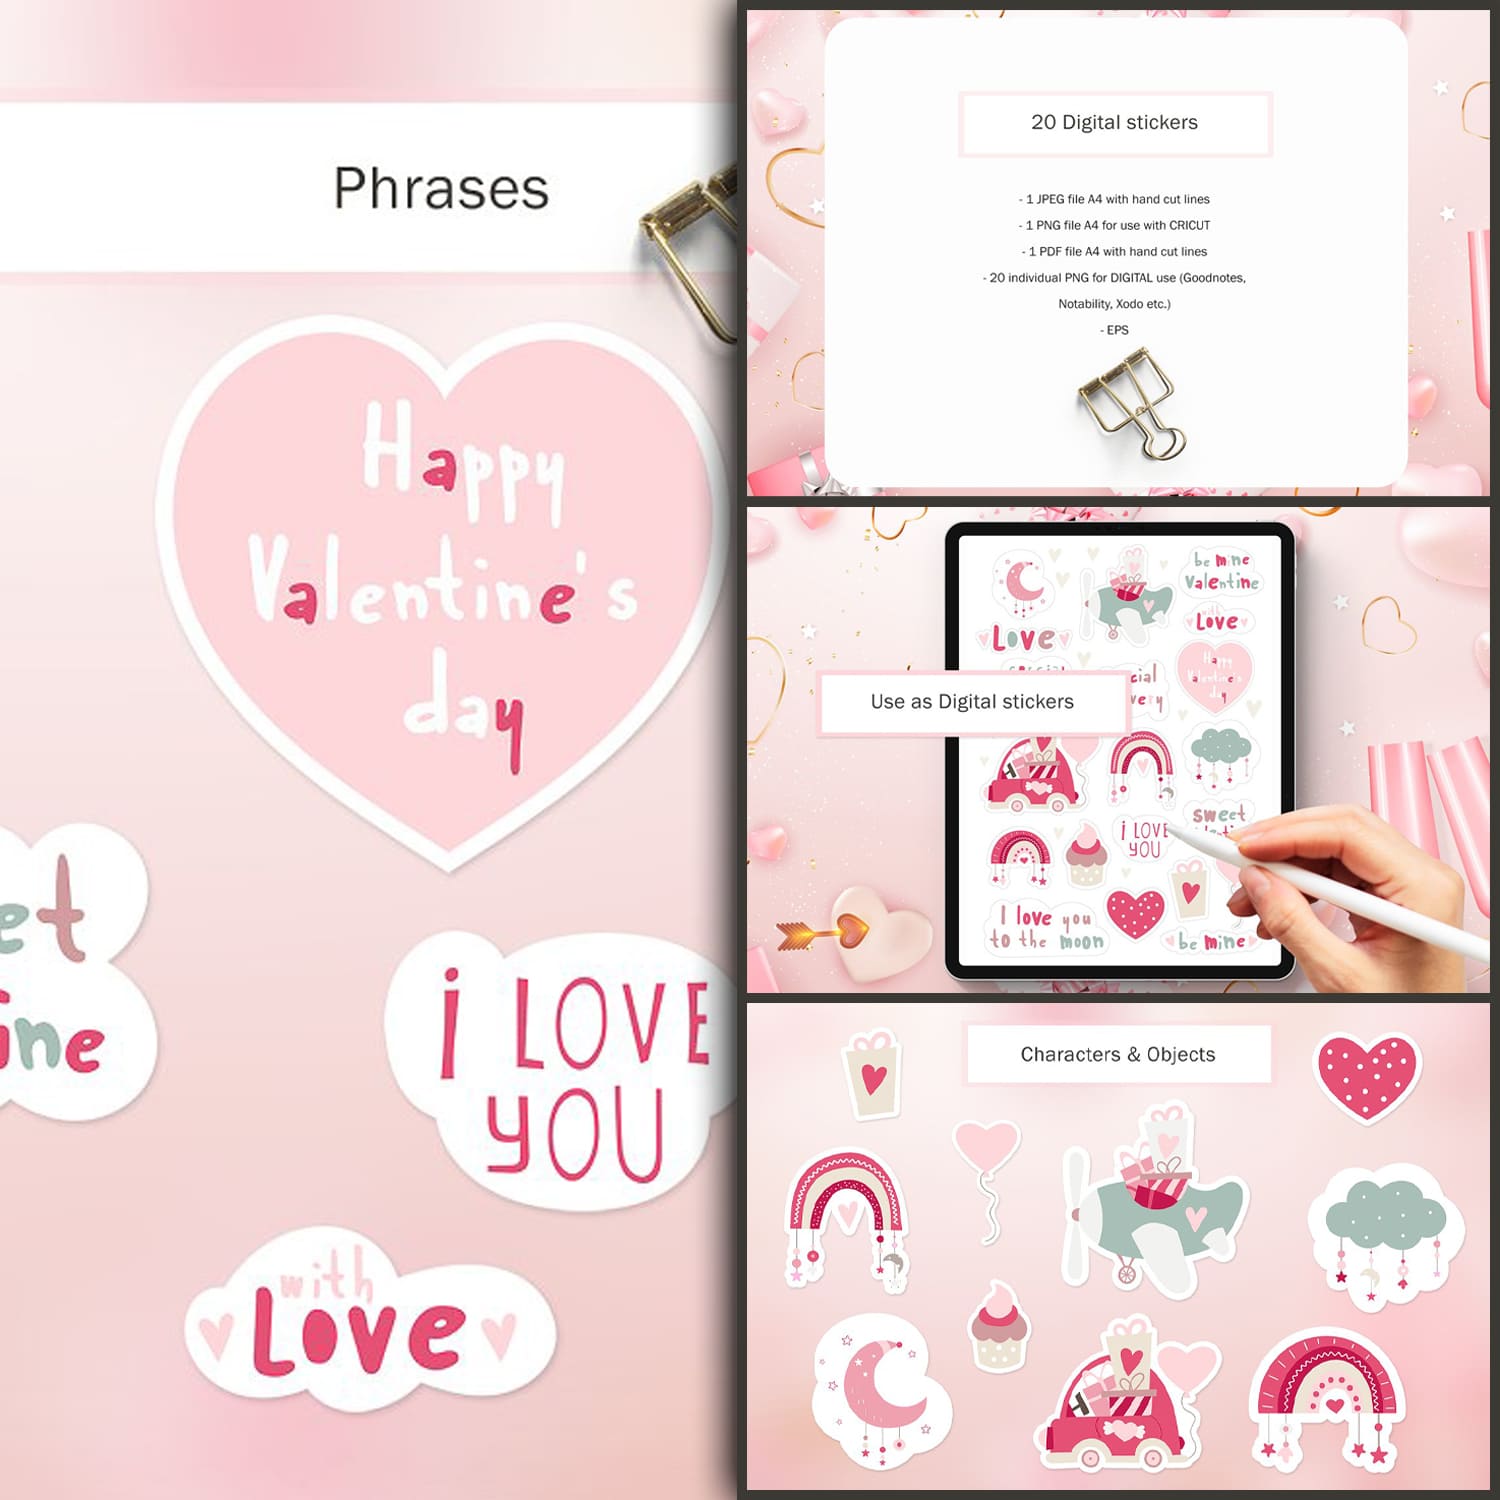 Four pink slides of Valentine's Day Romantic Collection.